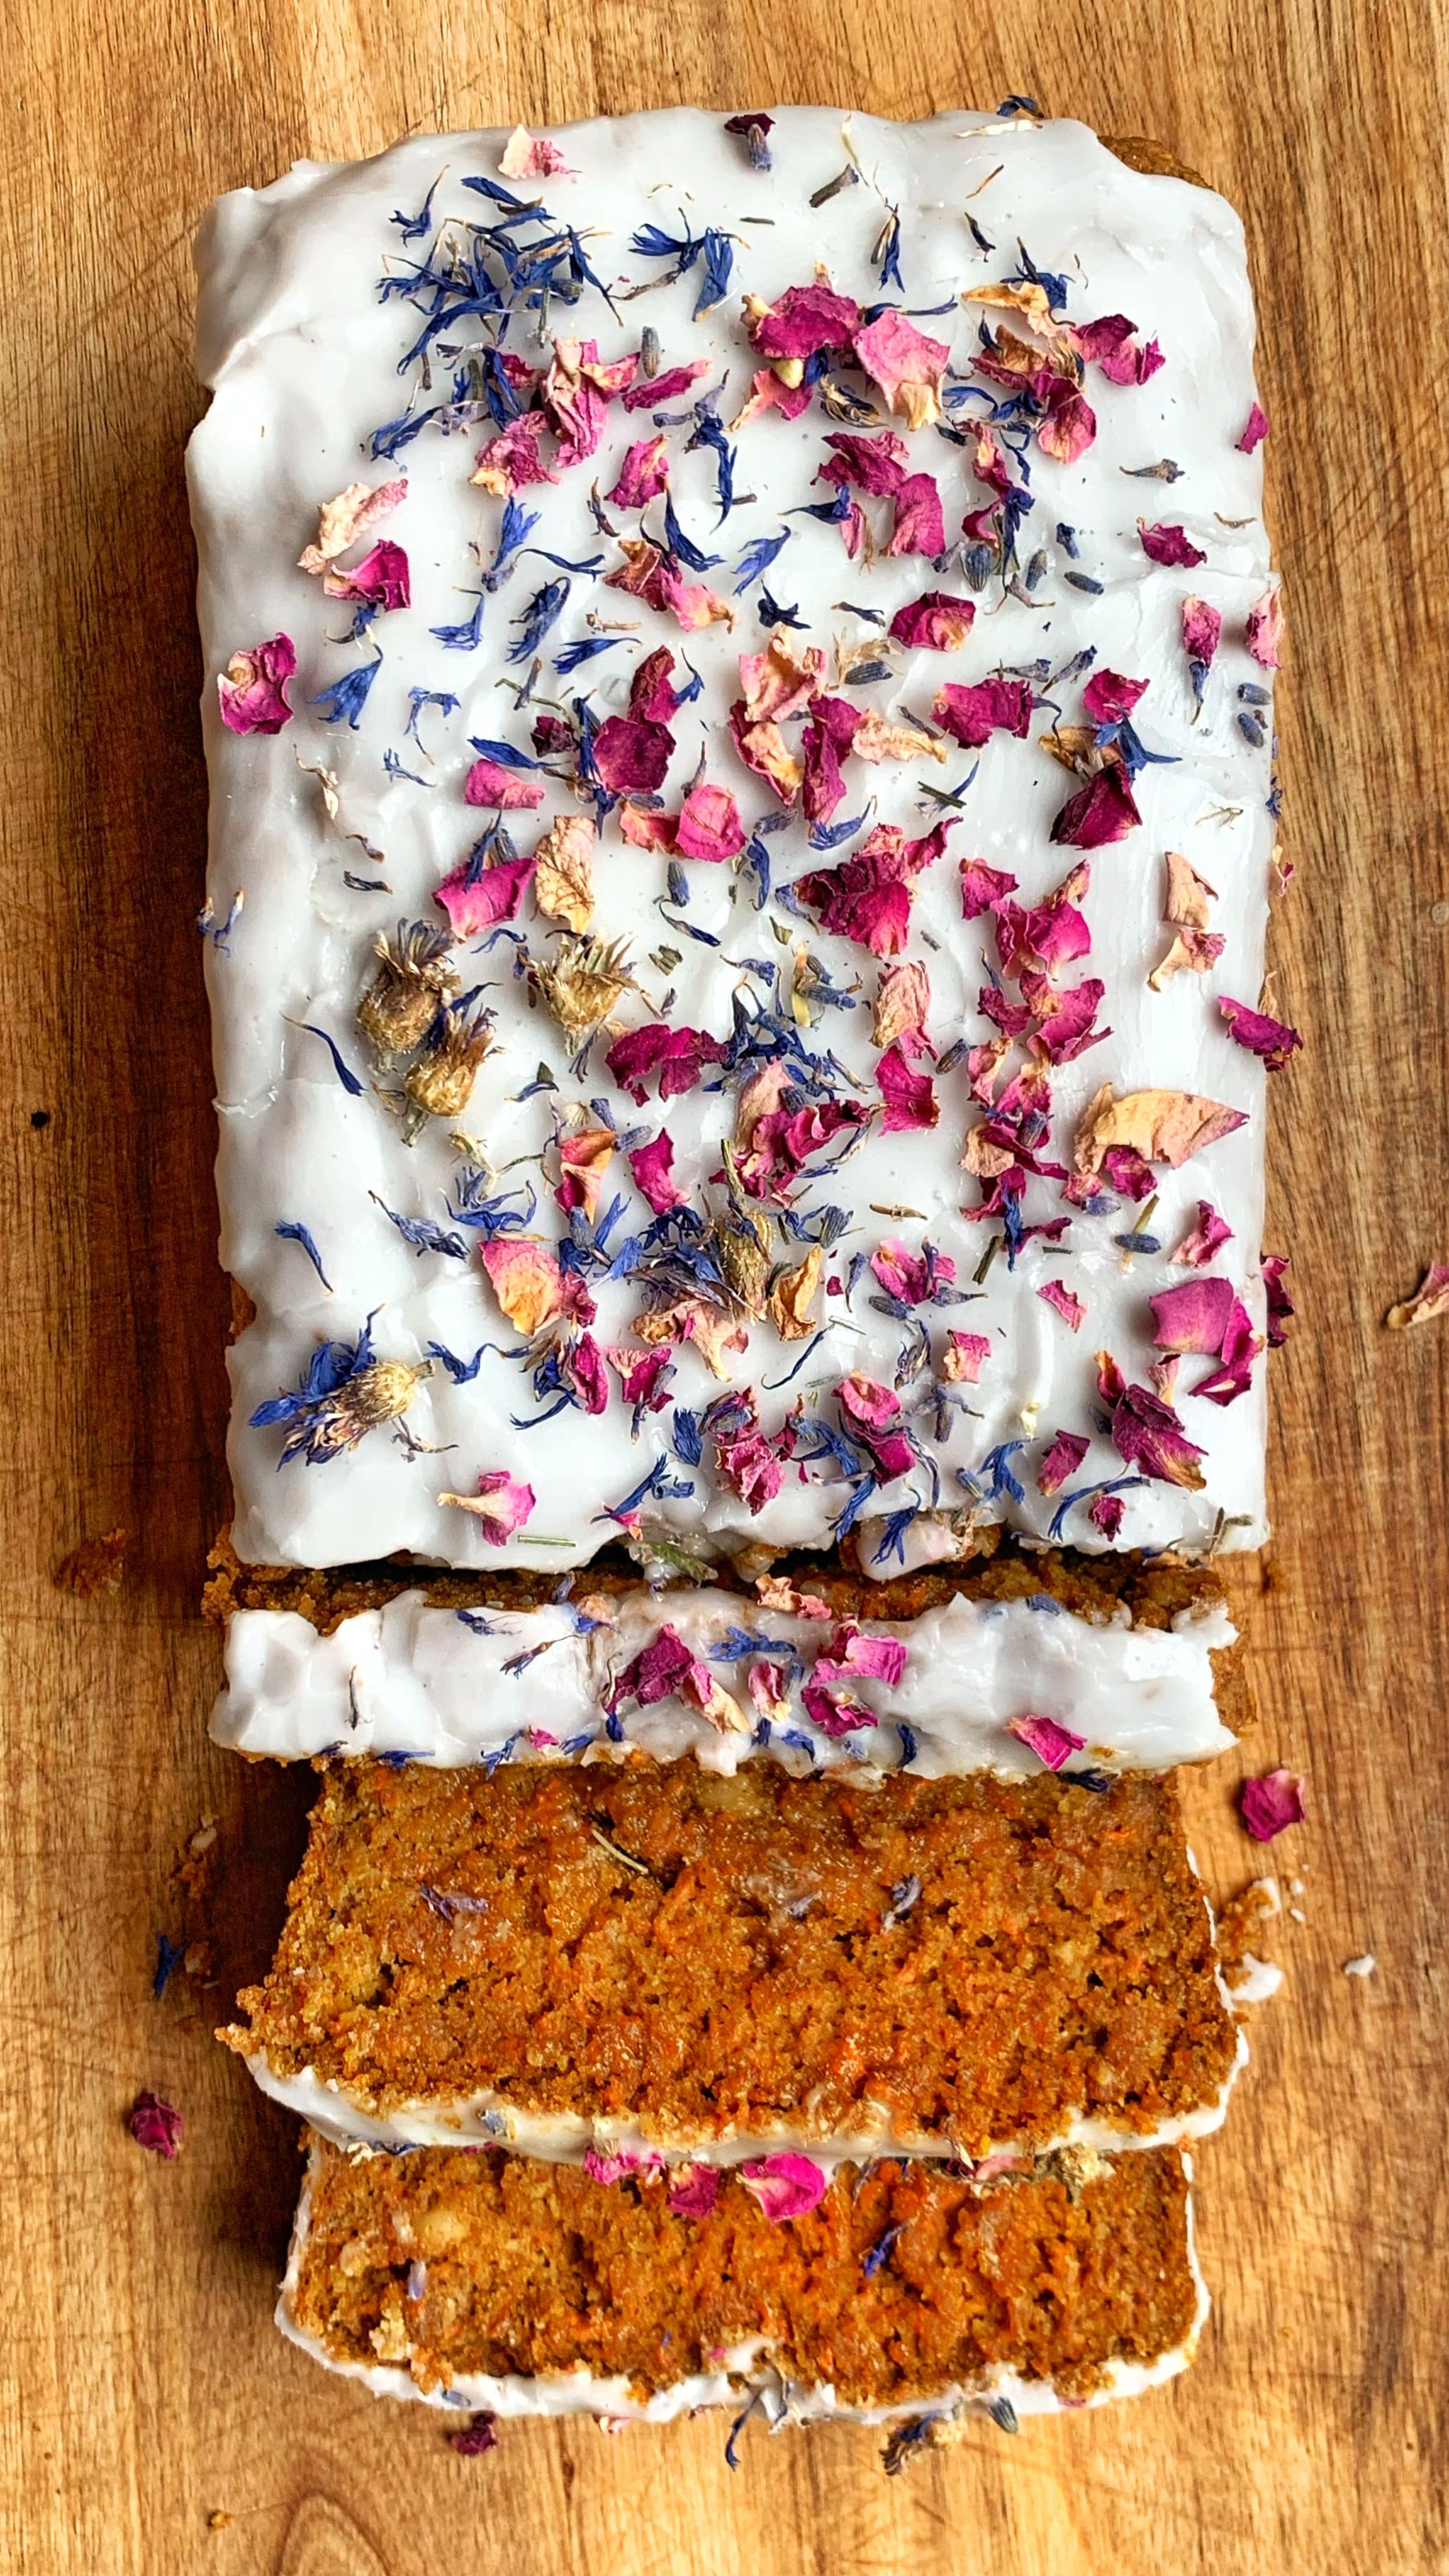 Carrot Cake with Candied Walnuts and a Walnut Crumb - Network Ten